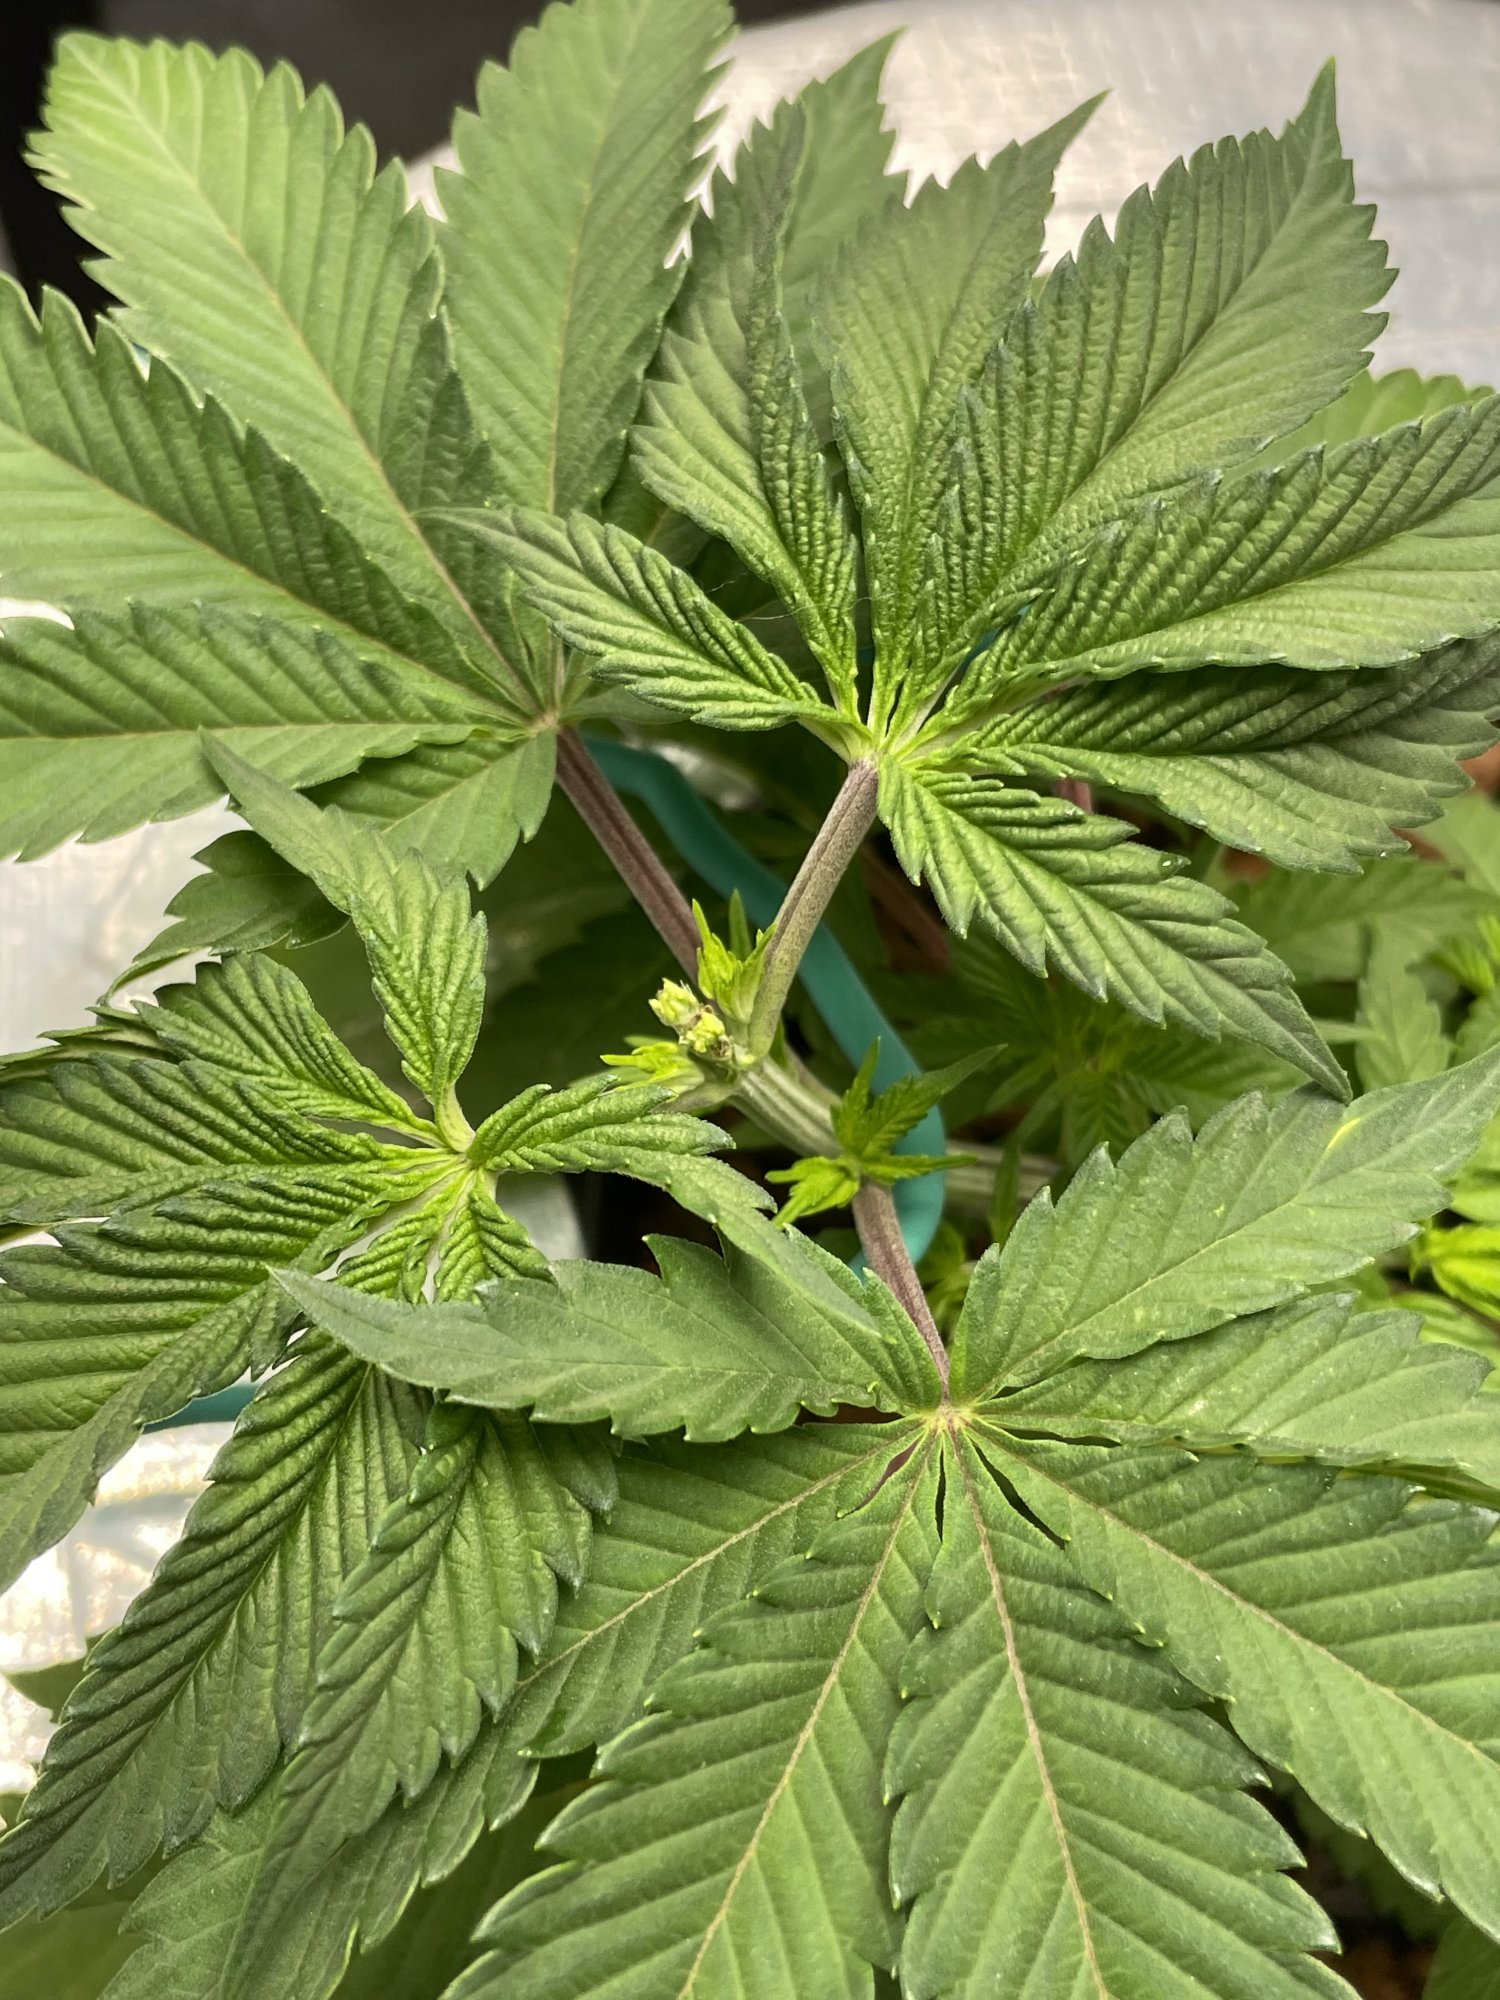 I have a dumb question about topping